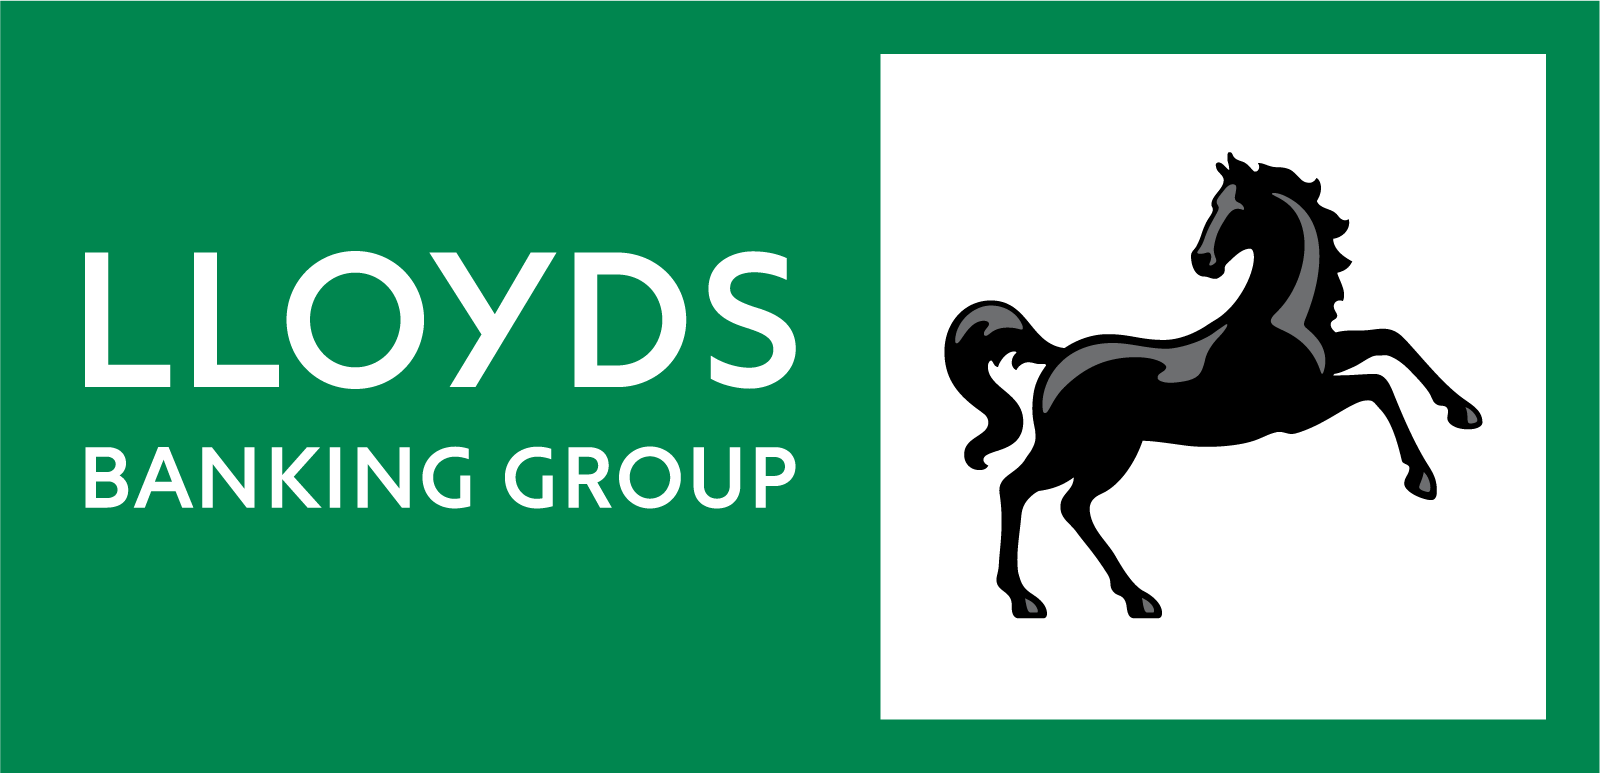 an image of the lloyds banking group logo